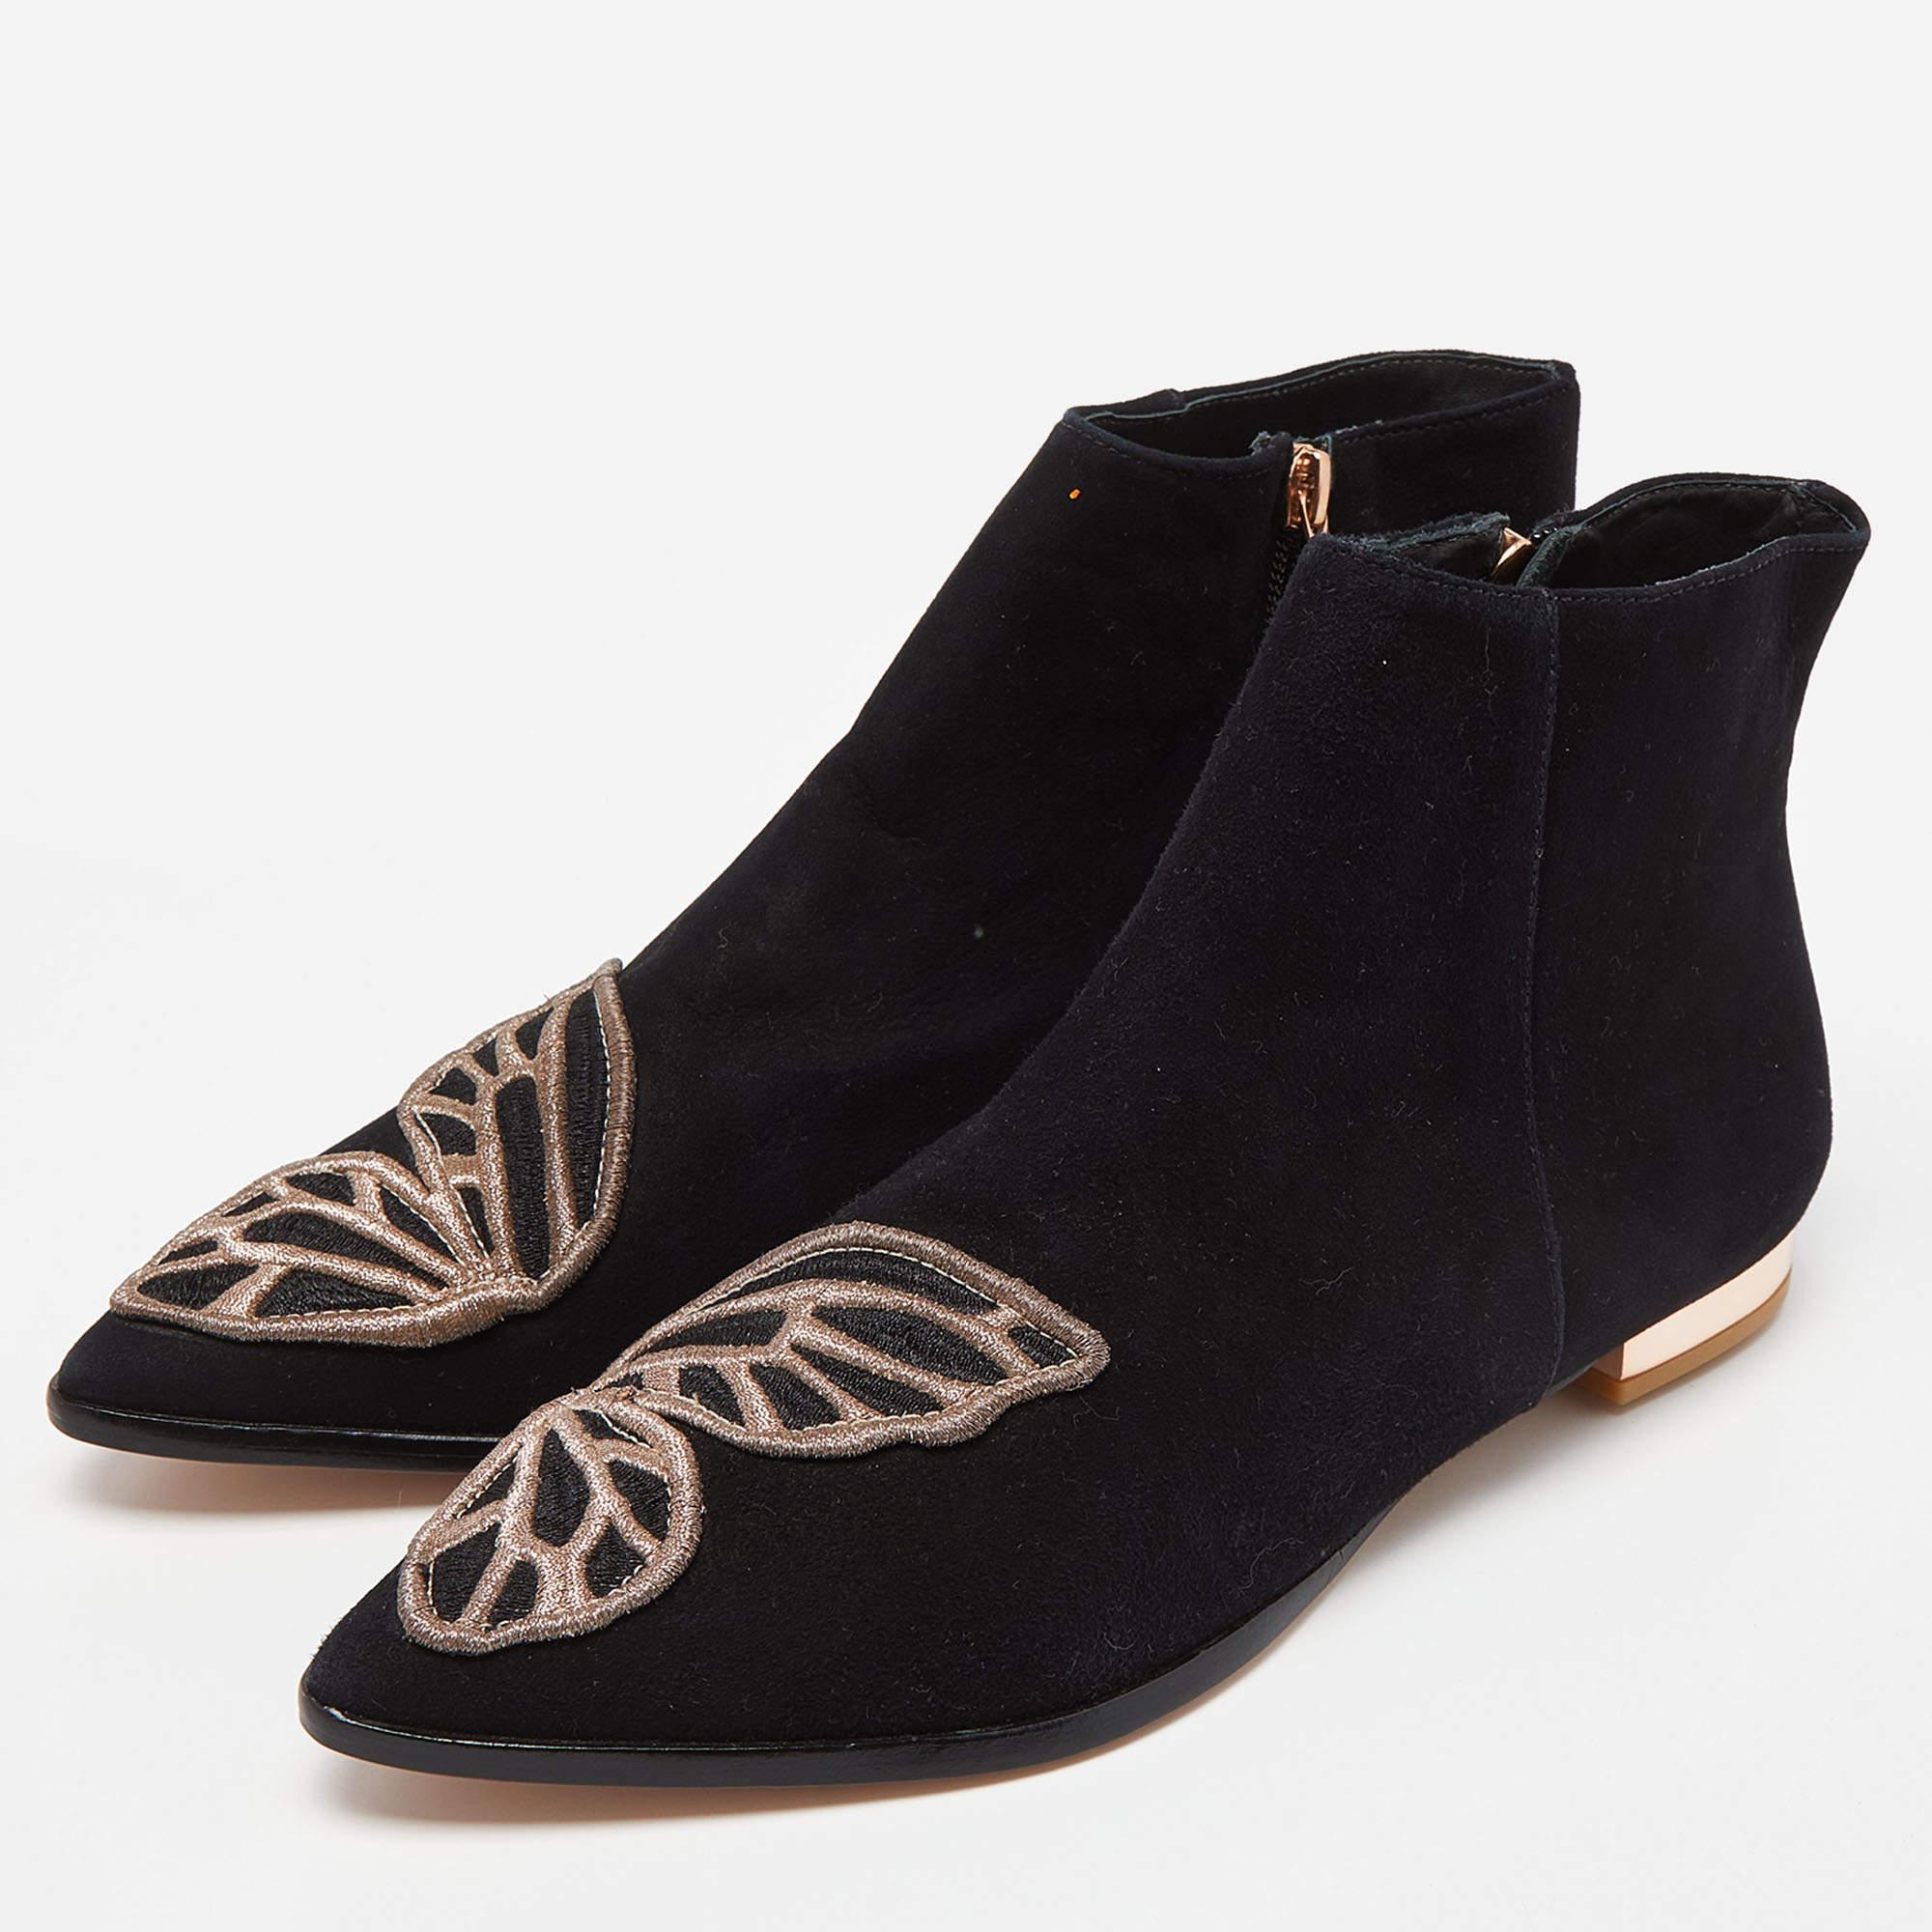 Sophia Webster Black Suede Karina Butterfly Ankle Boots Size 39 For Sale 2